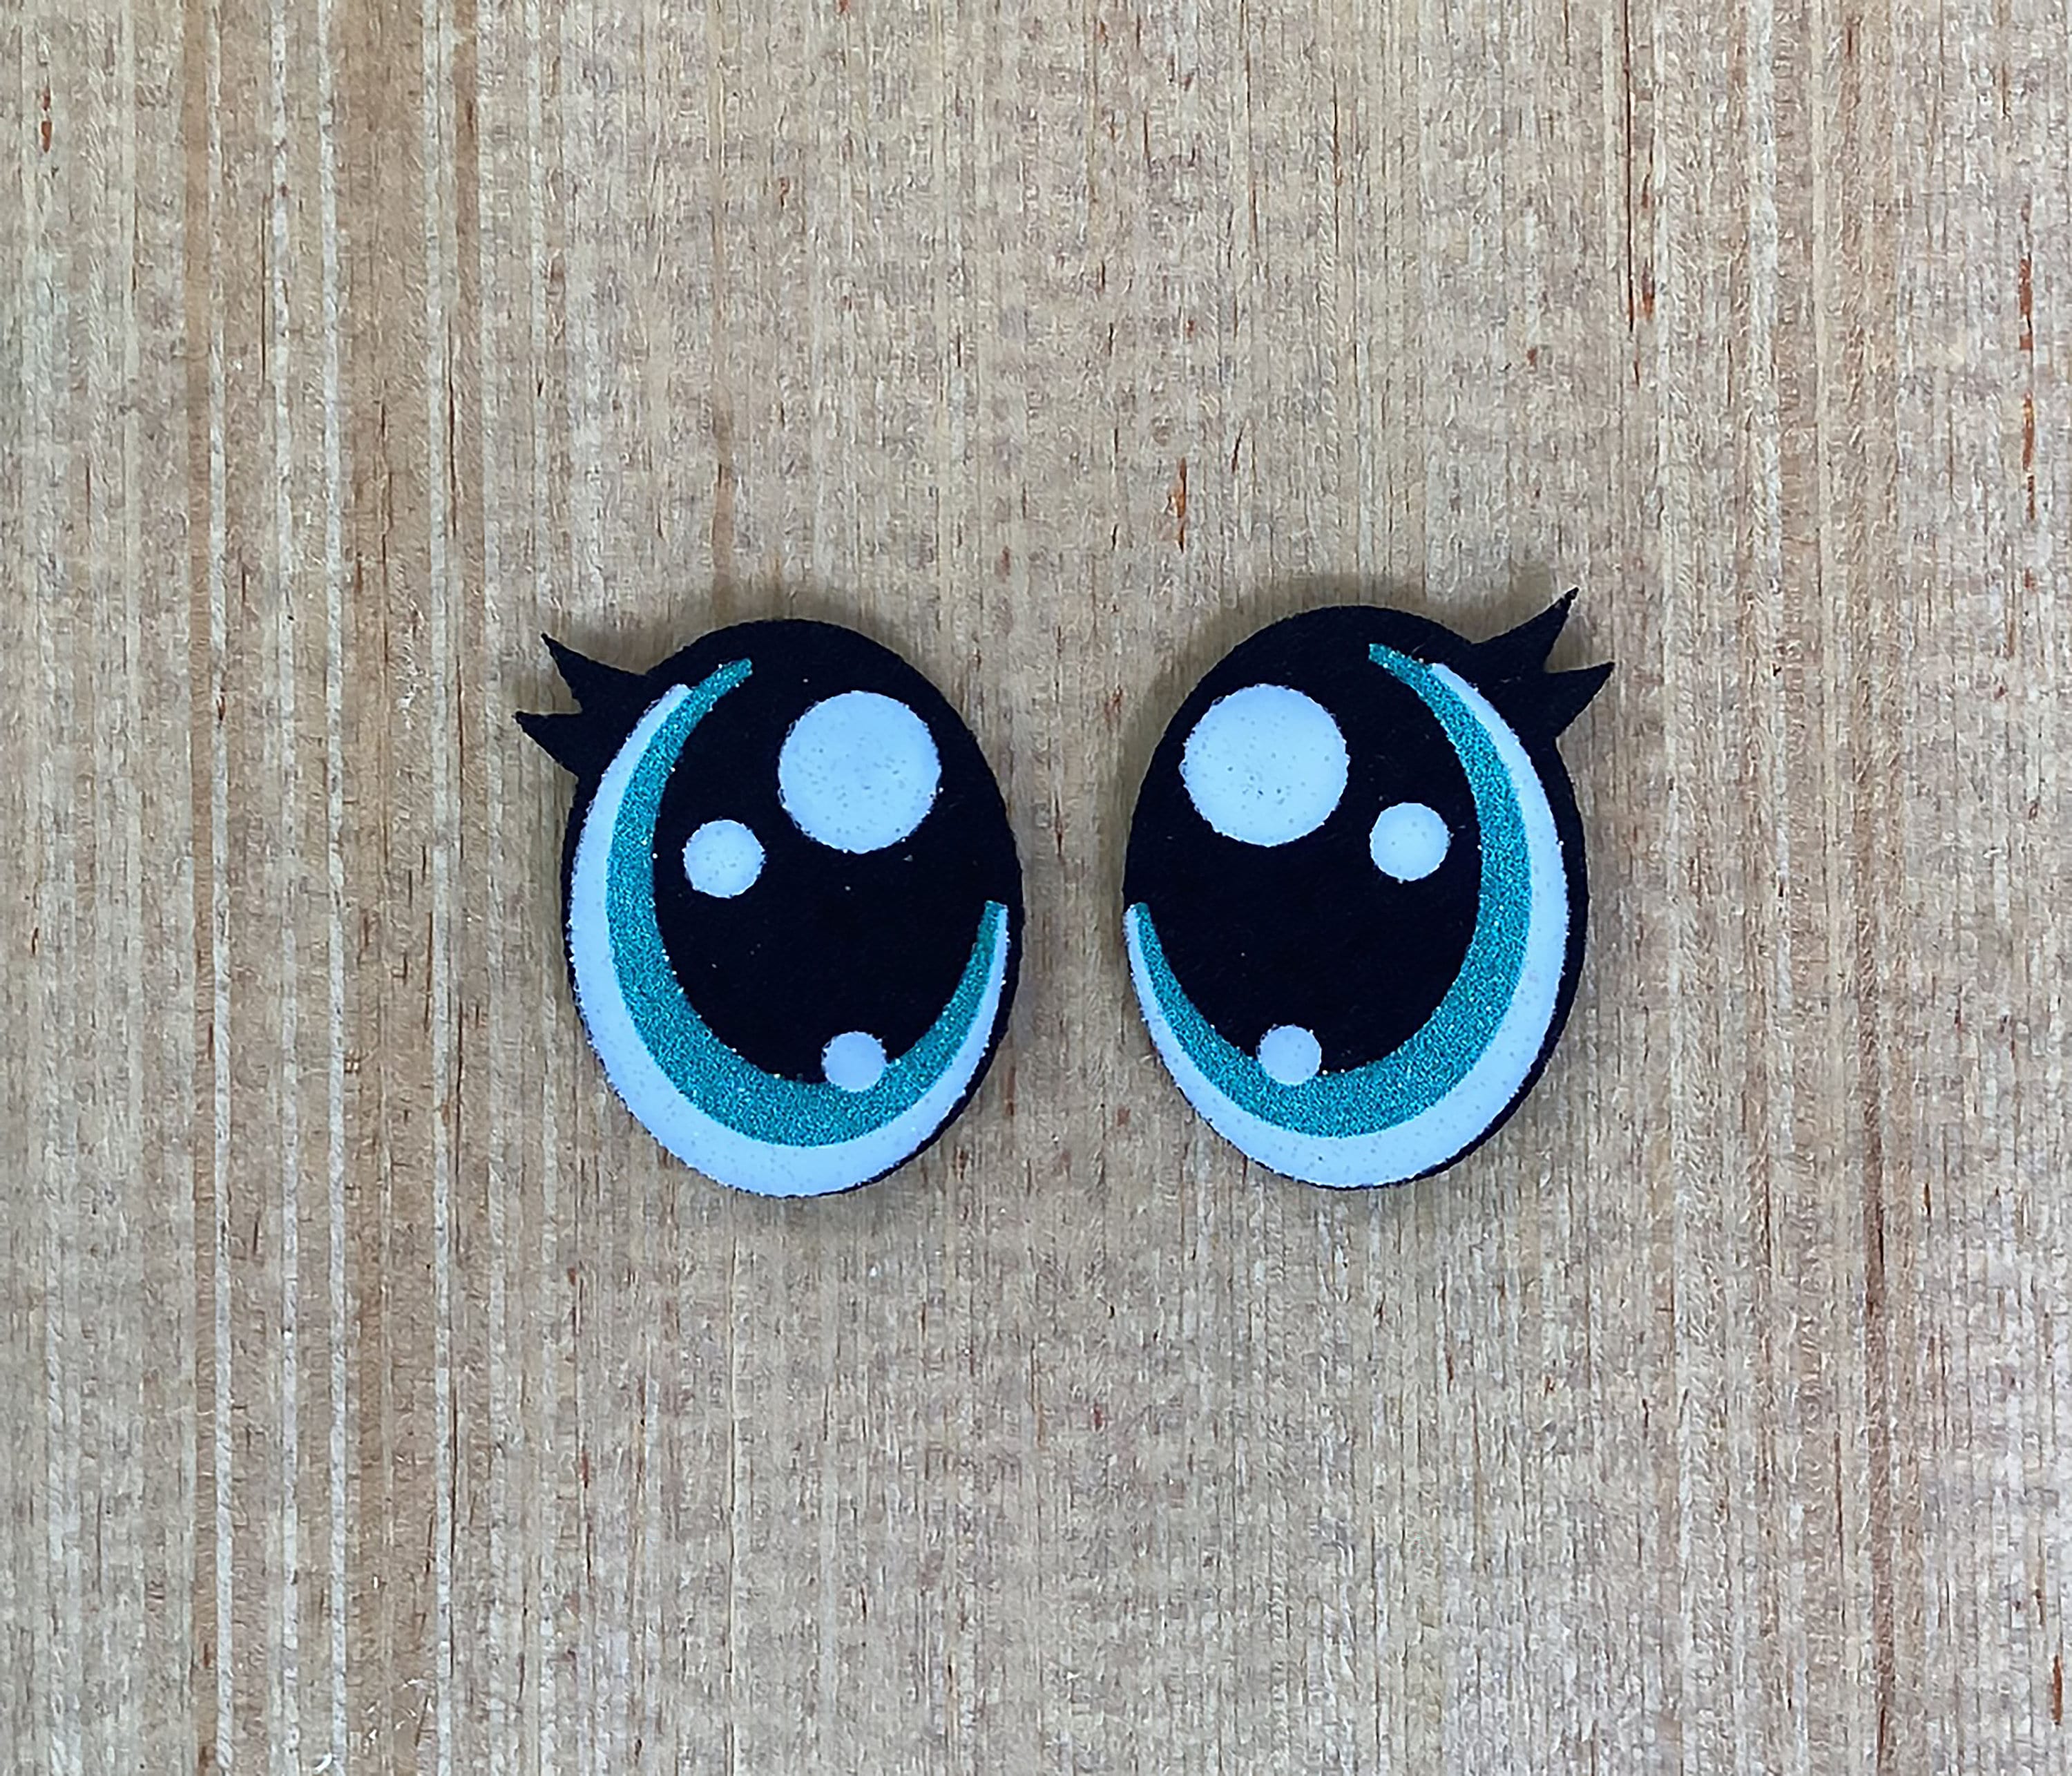 Solid Black Glass Eyes, 20 Pieces 10 Pairs Glass Eyes for Needle Felting in  Your Choice of 3mm, 5mm, 7mm 